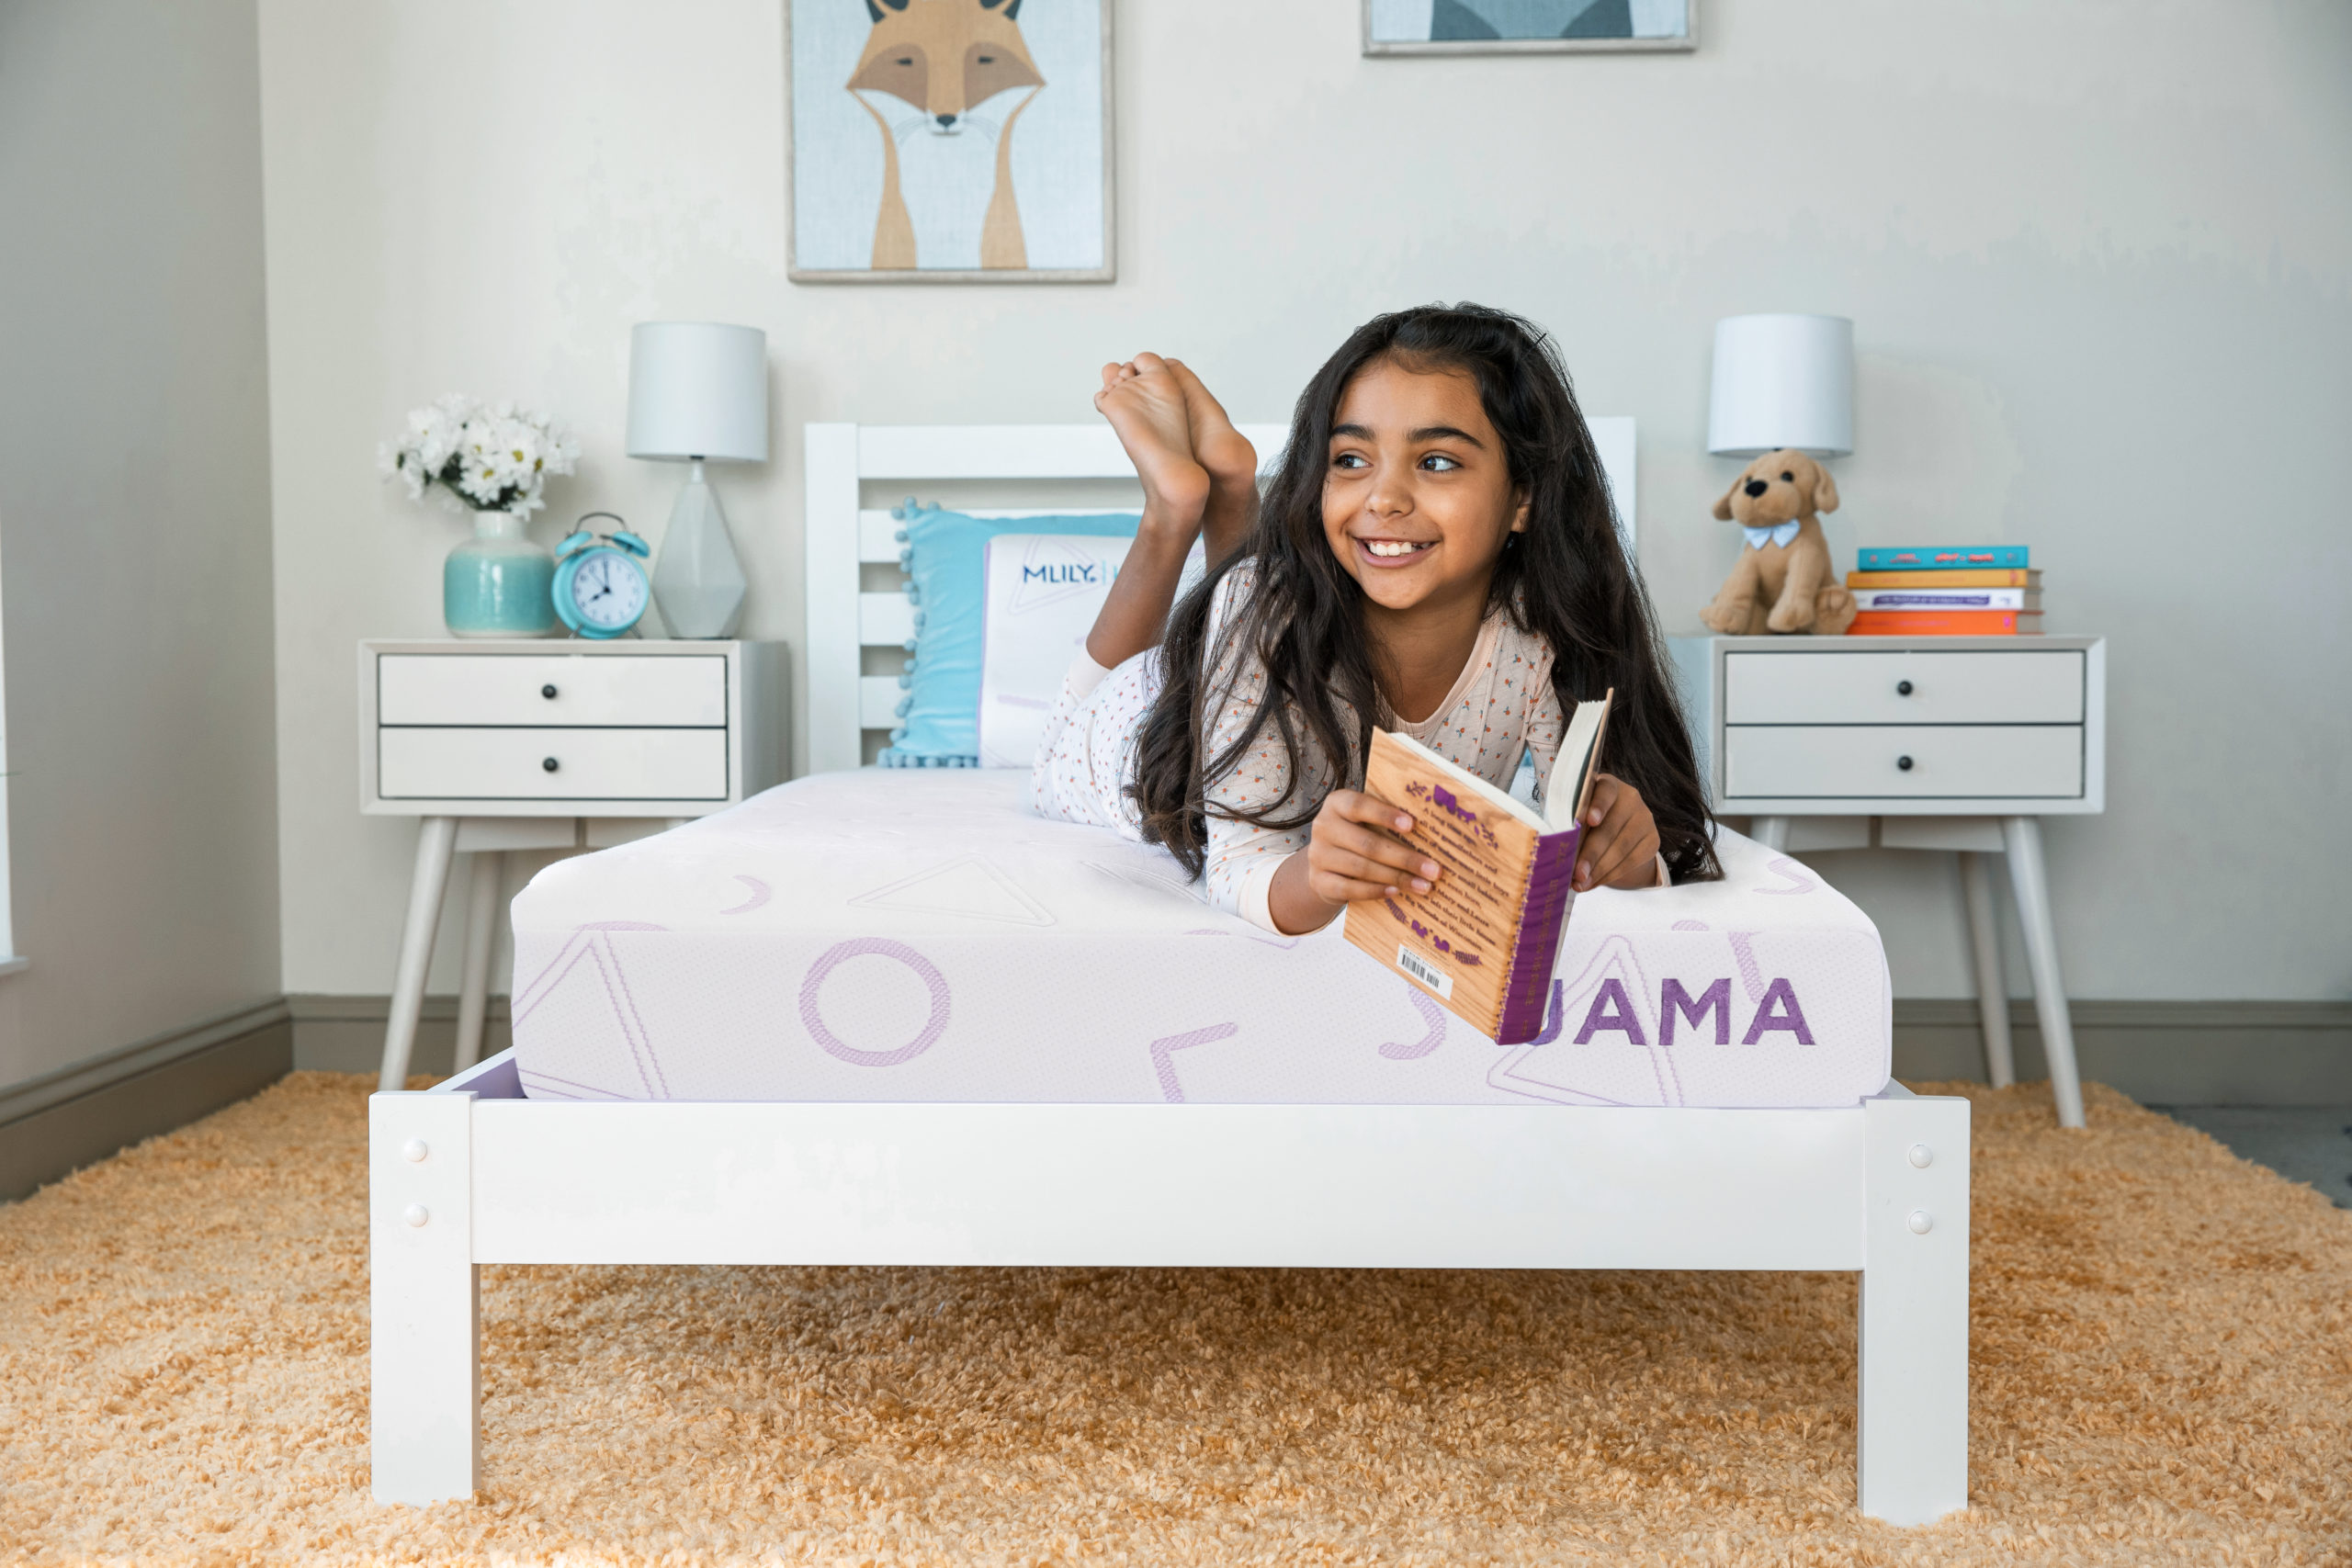 A child's bedroom with a girl laying on her stomach on a white mattress with purple designs labeled JAMA in purple, holding a book and smiling.